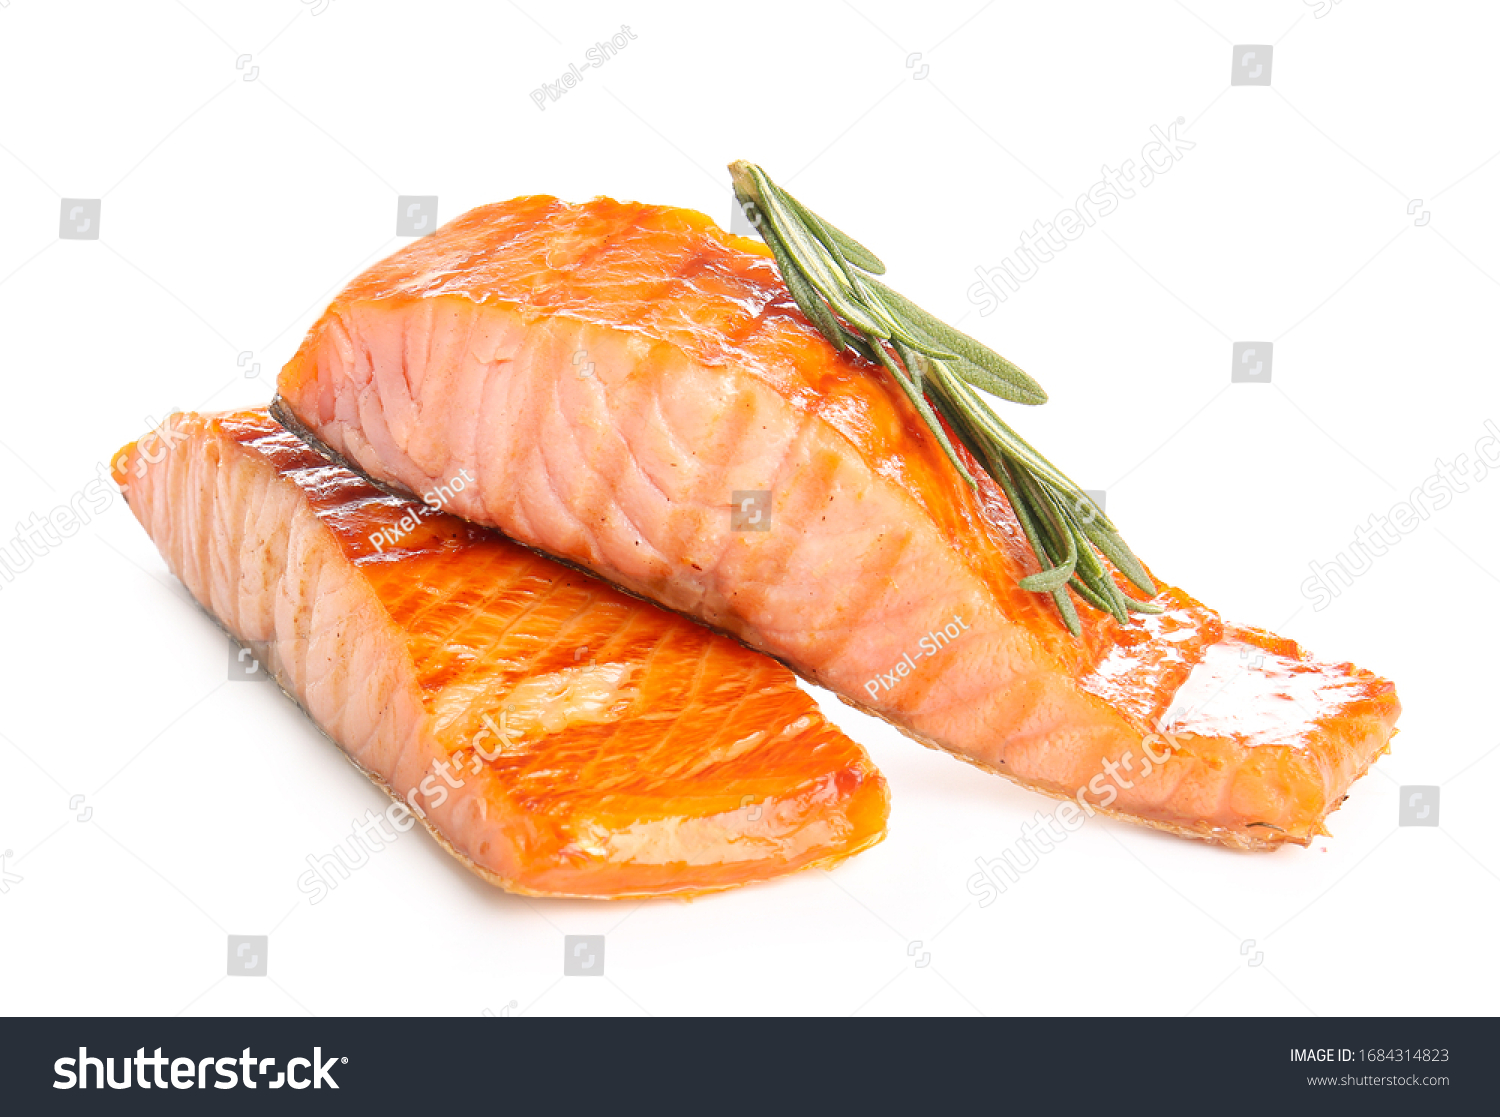 Cooked salmon fillet on white background #1684314823